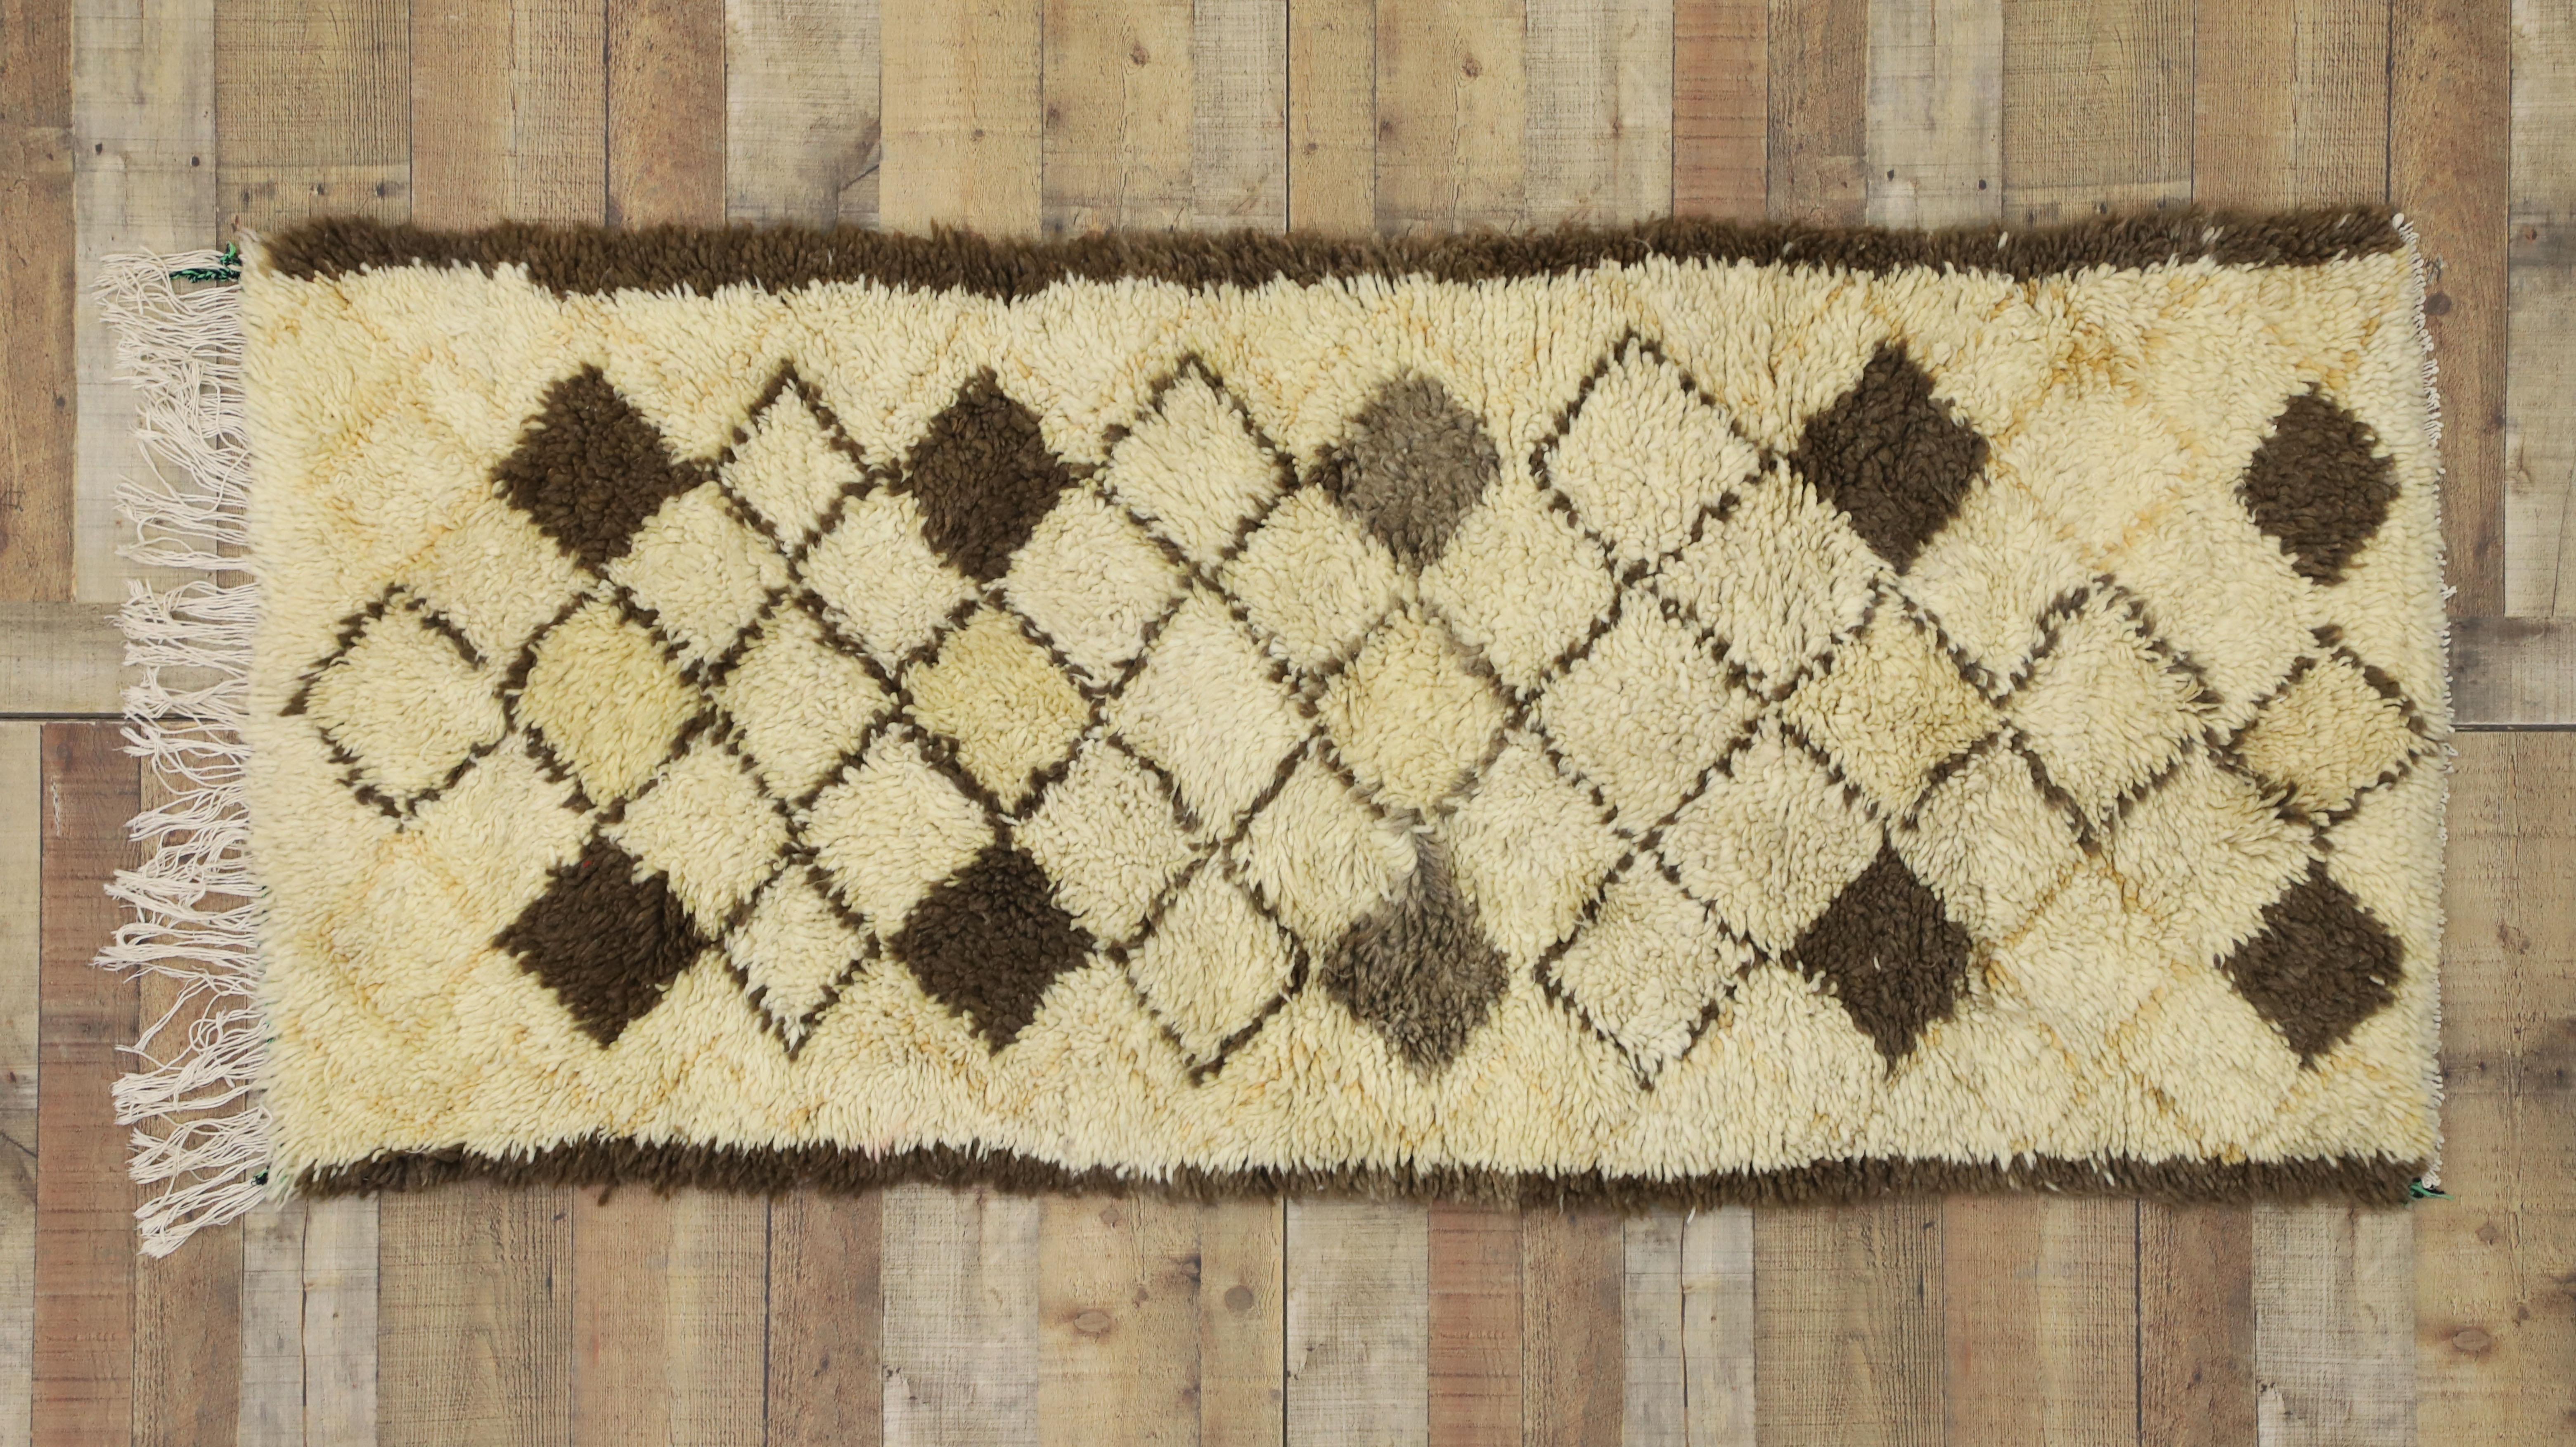 Vintage Moroccan Azilal Rug, Neutral Berber Moroccan Rug with Neutral Colors 1